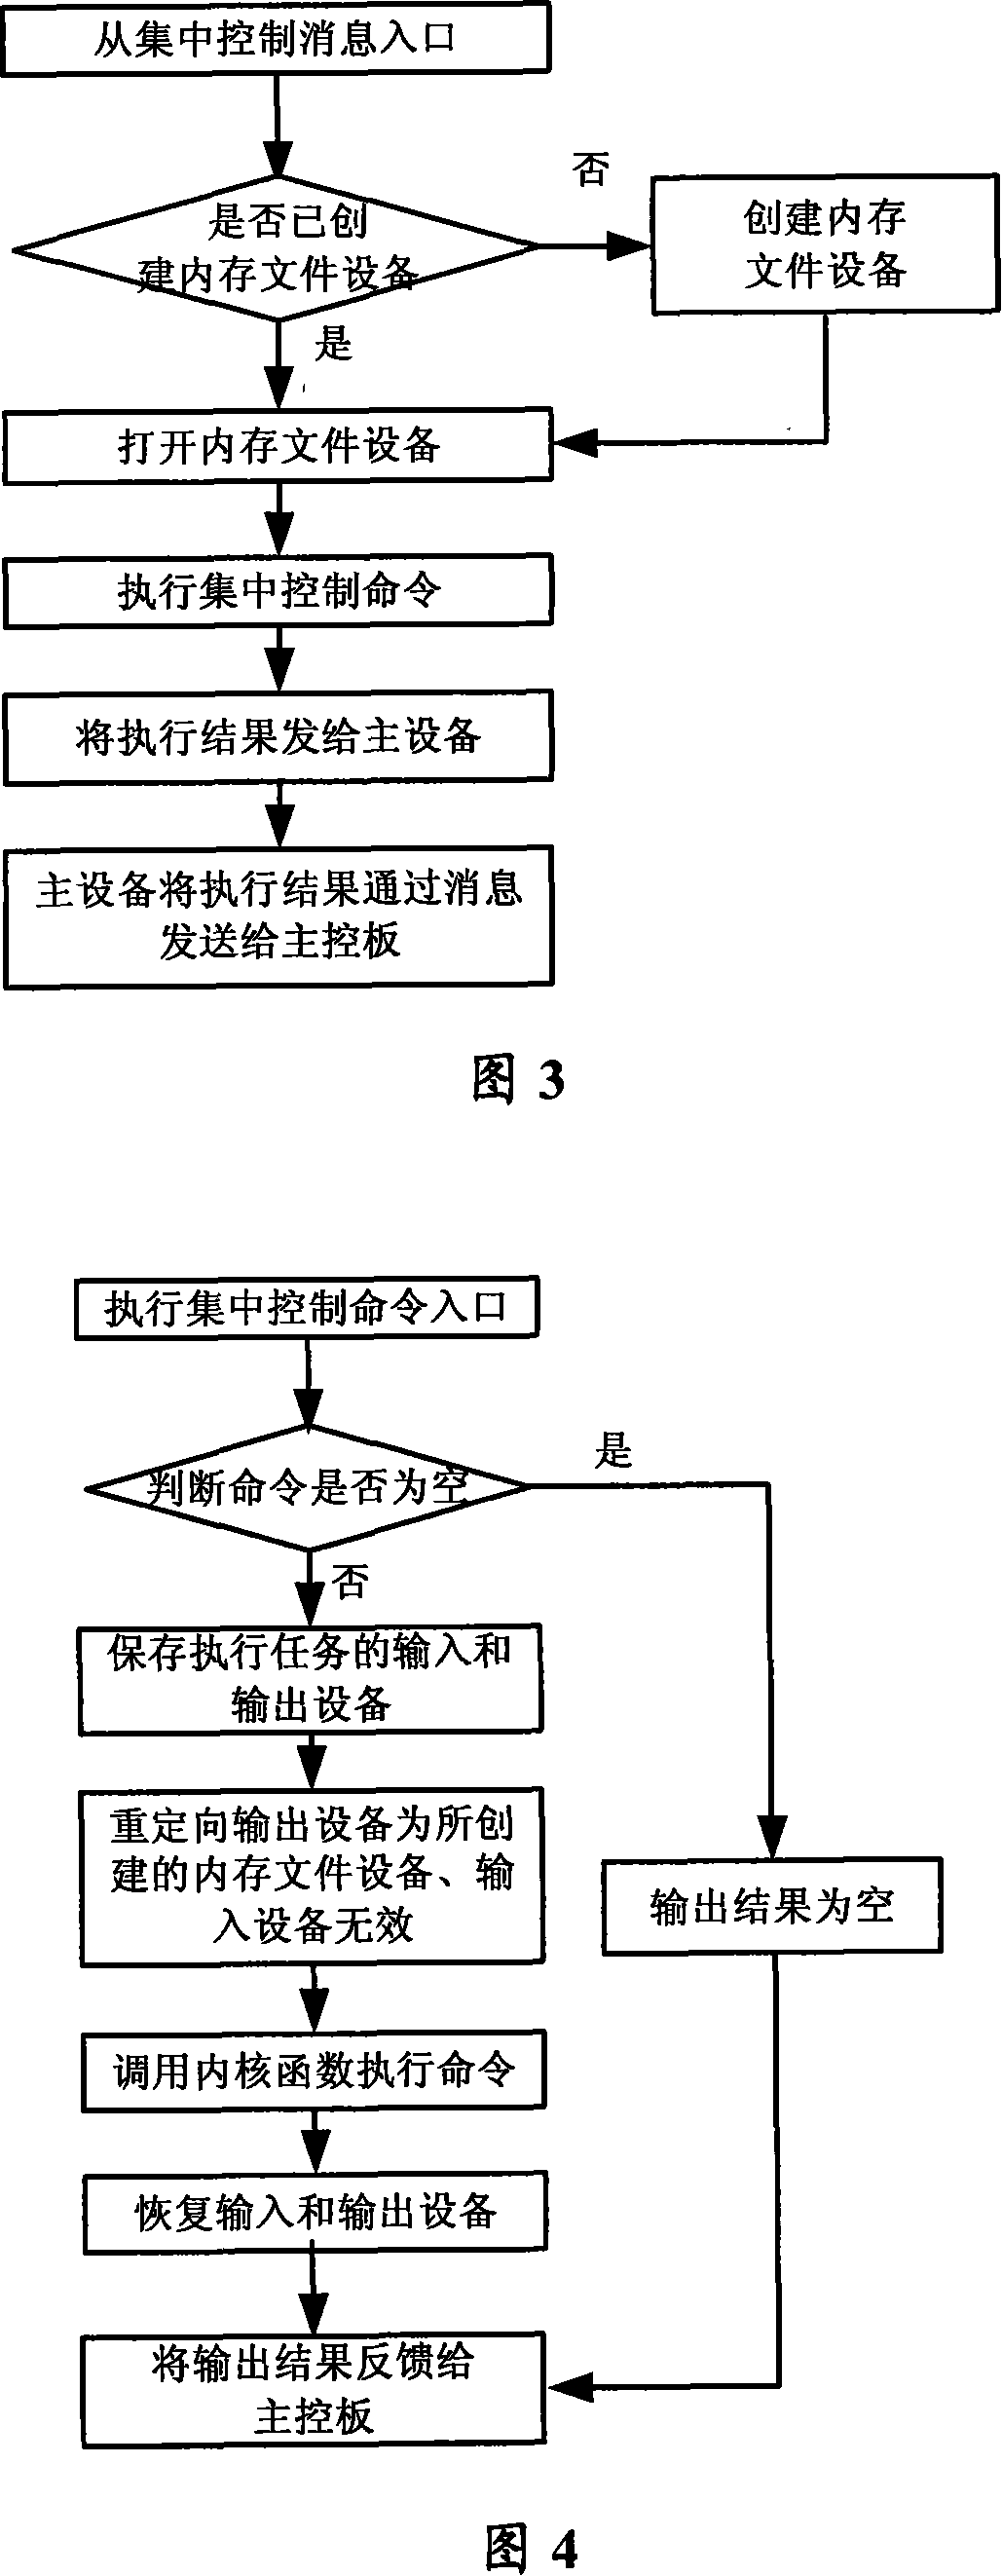 Operation control method of distributed router system